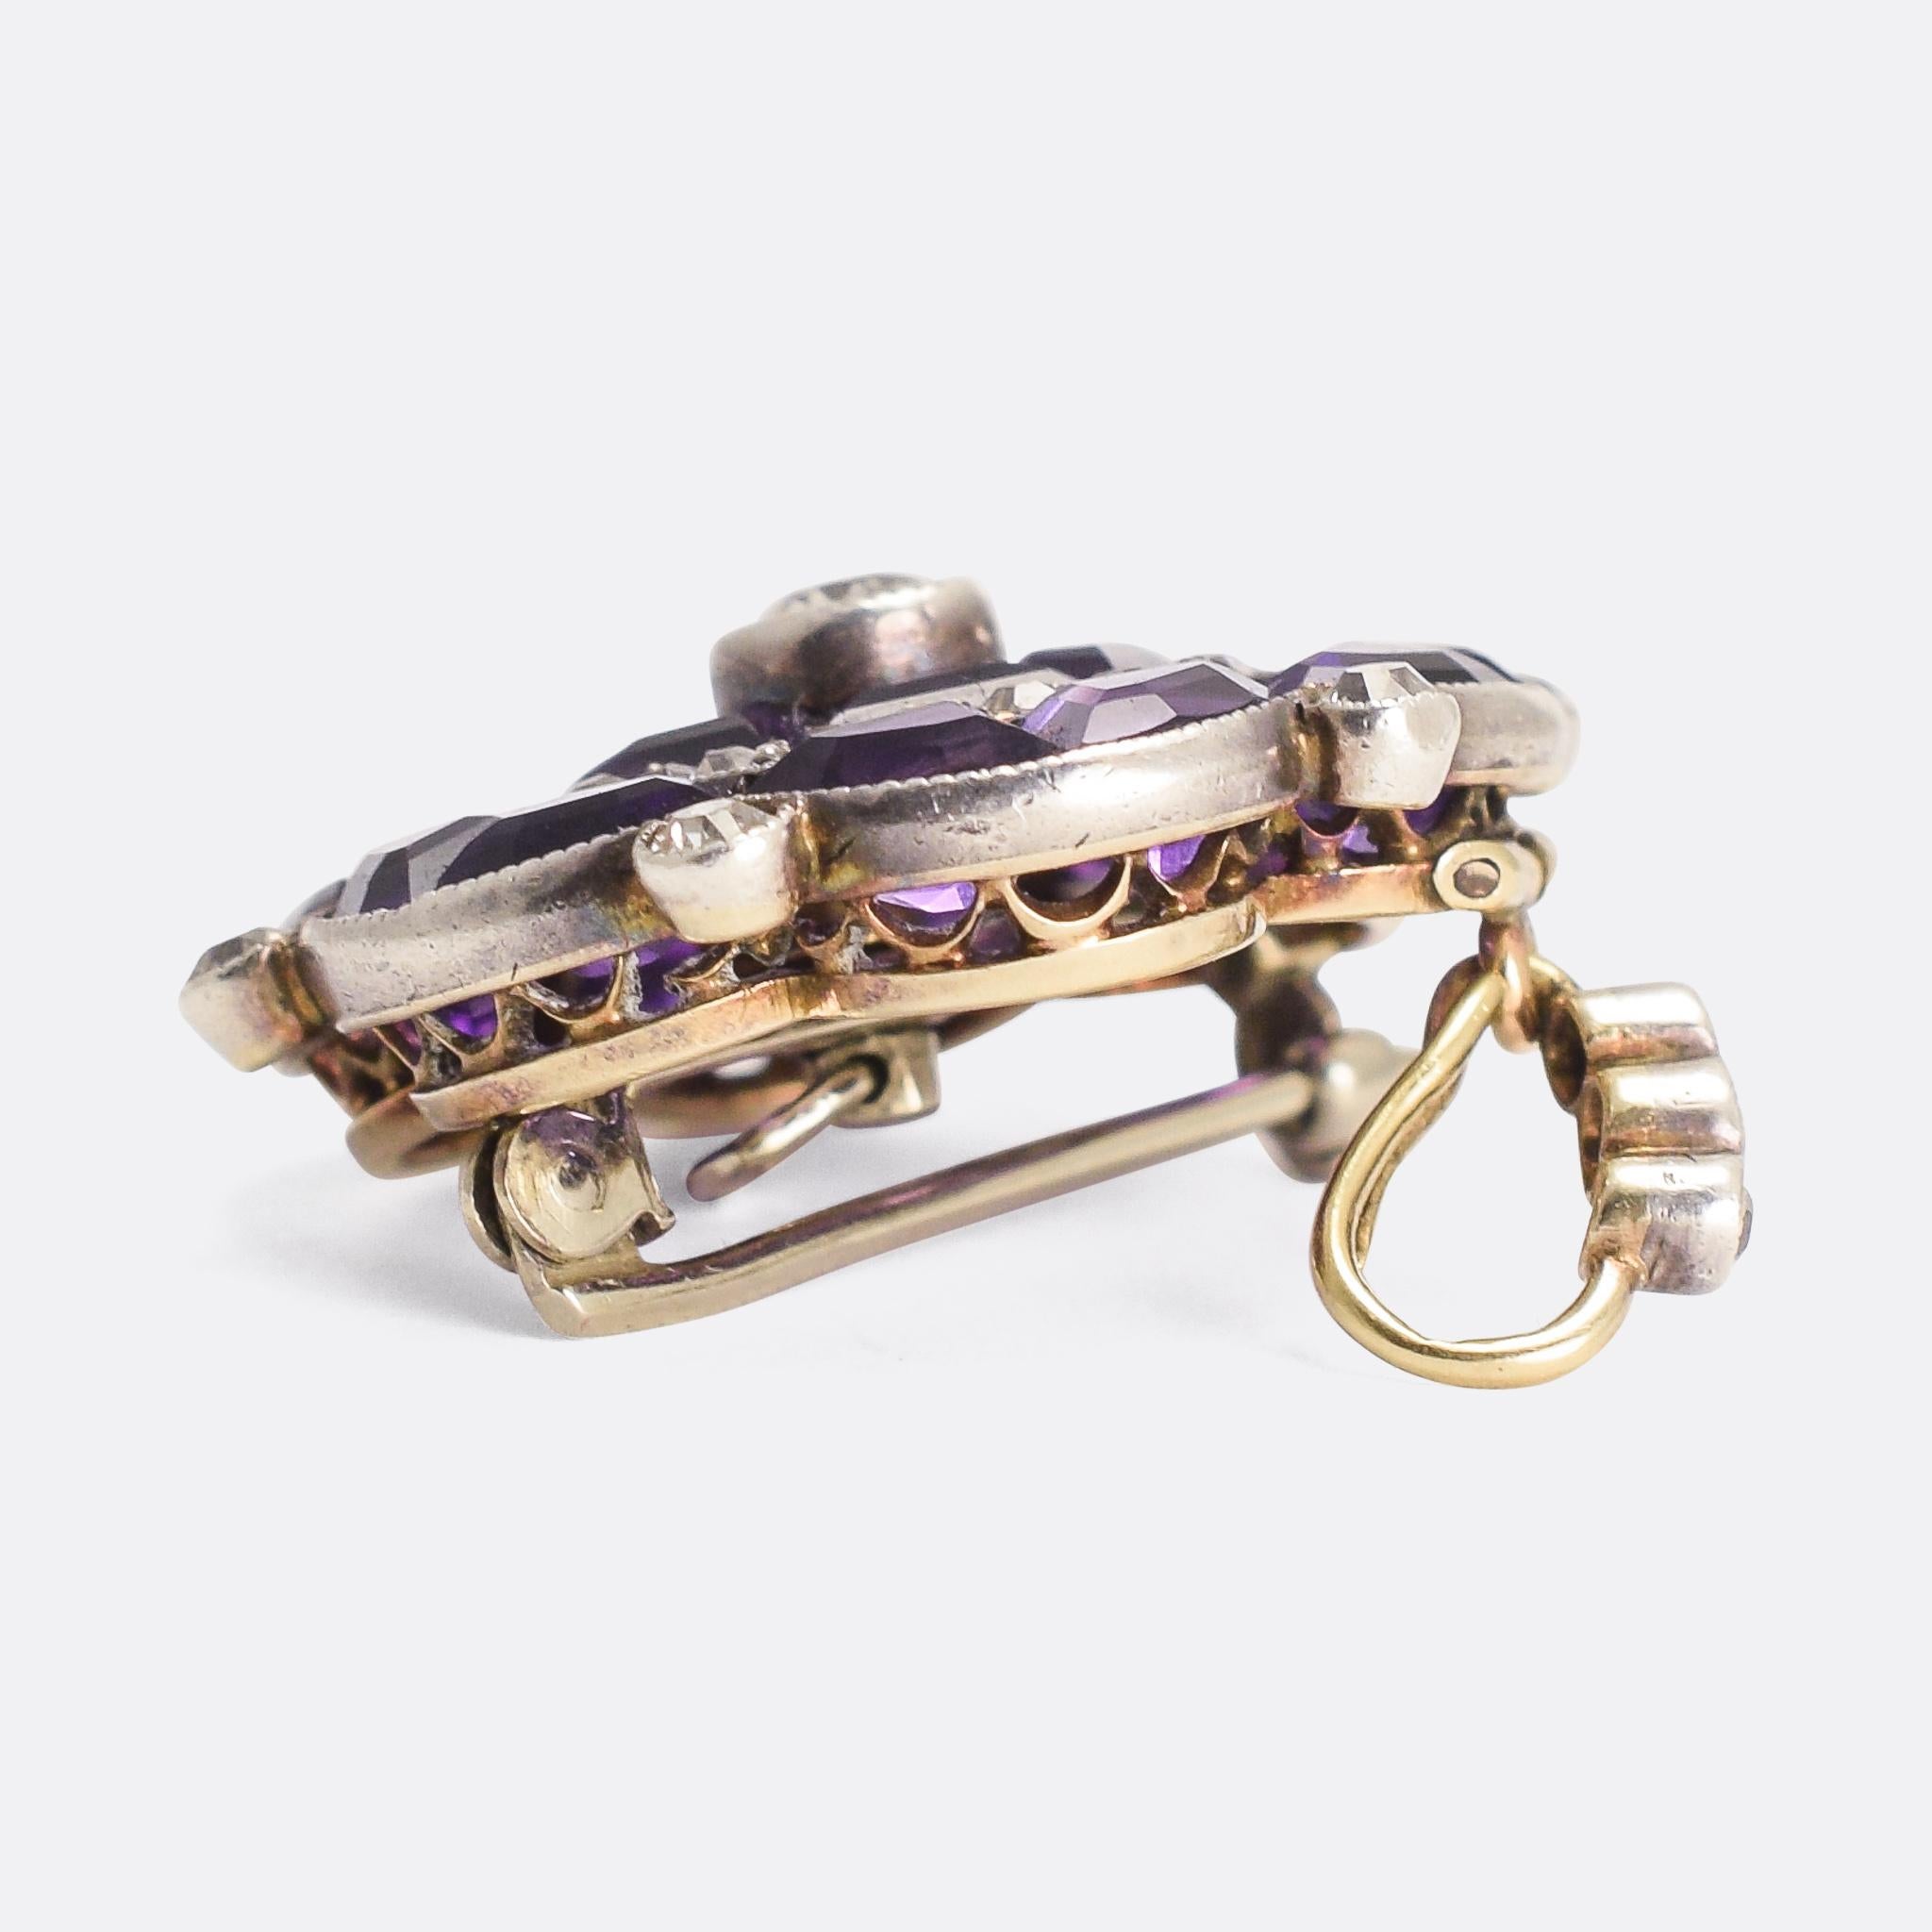 A stunning antique pendant dating from the Edwardian period, circa 1910. It features bezel set old cut diamonds, as well as vibrant invisibly set amethysts. Modelled in 15k gold and platinum, it's exceptionally well made with millegrain detailing